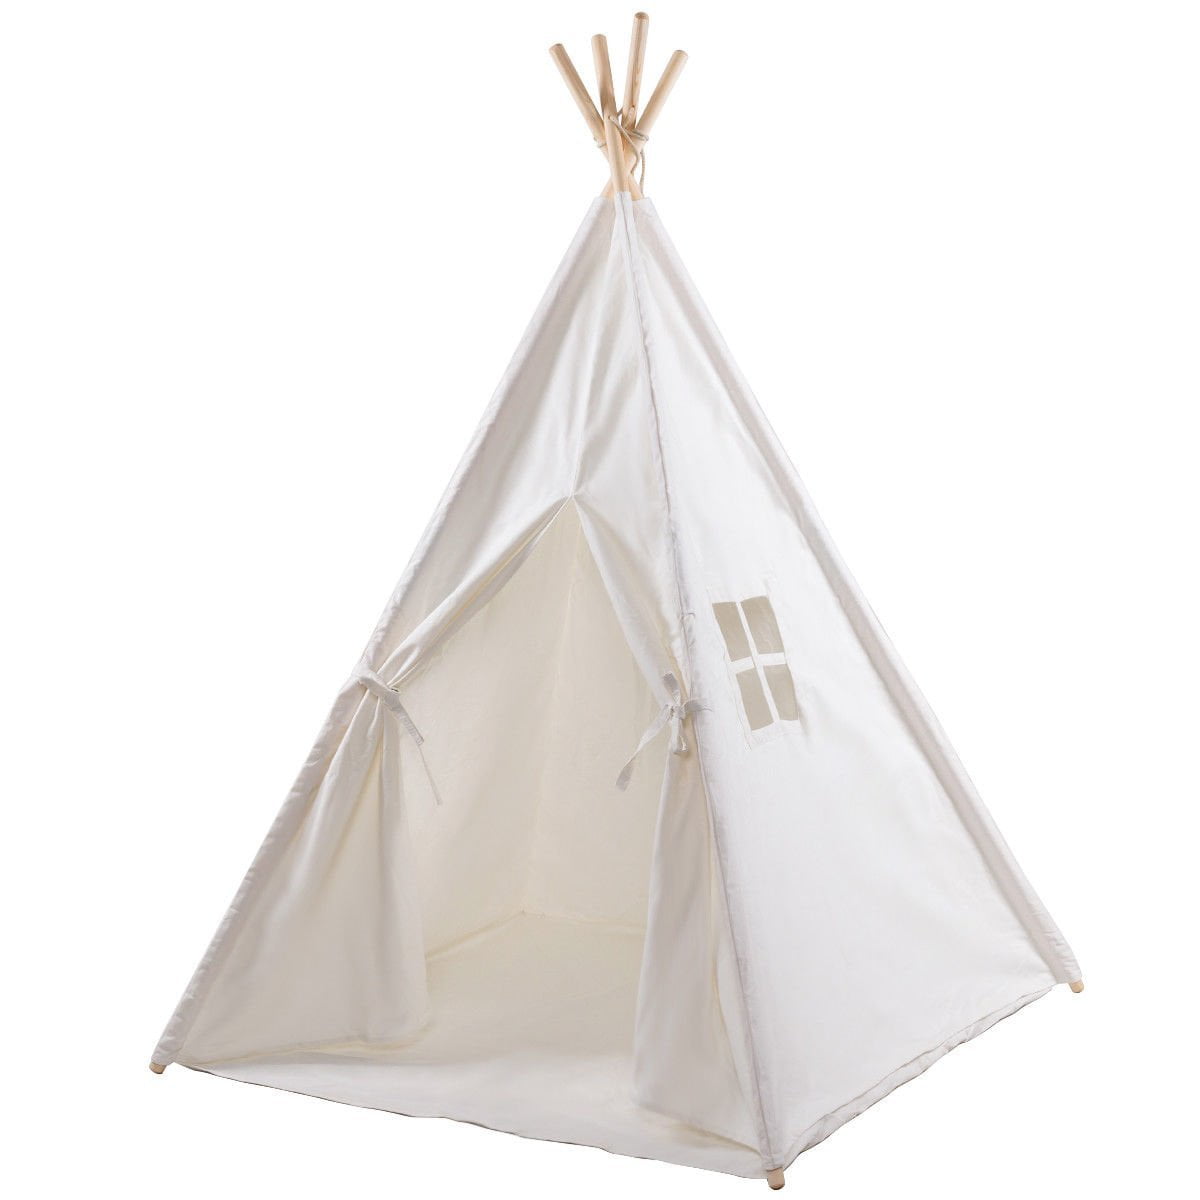 Large Kids Teepee Indoor Play Tent Cotton Canvas Children Indian Tipi Playhouse